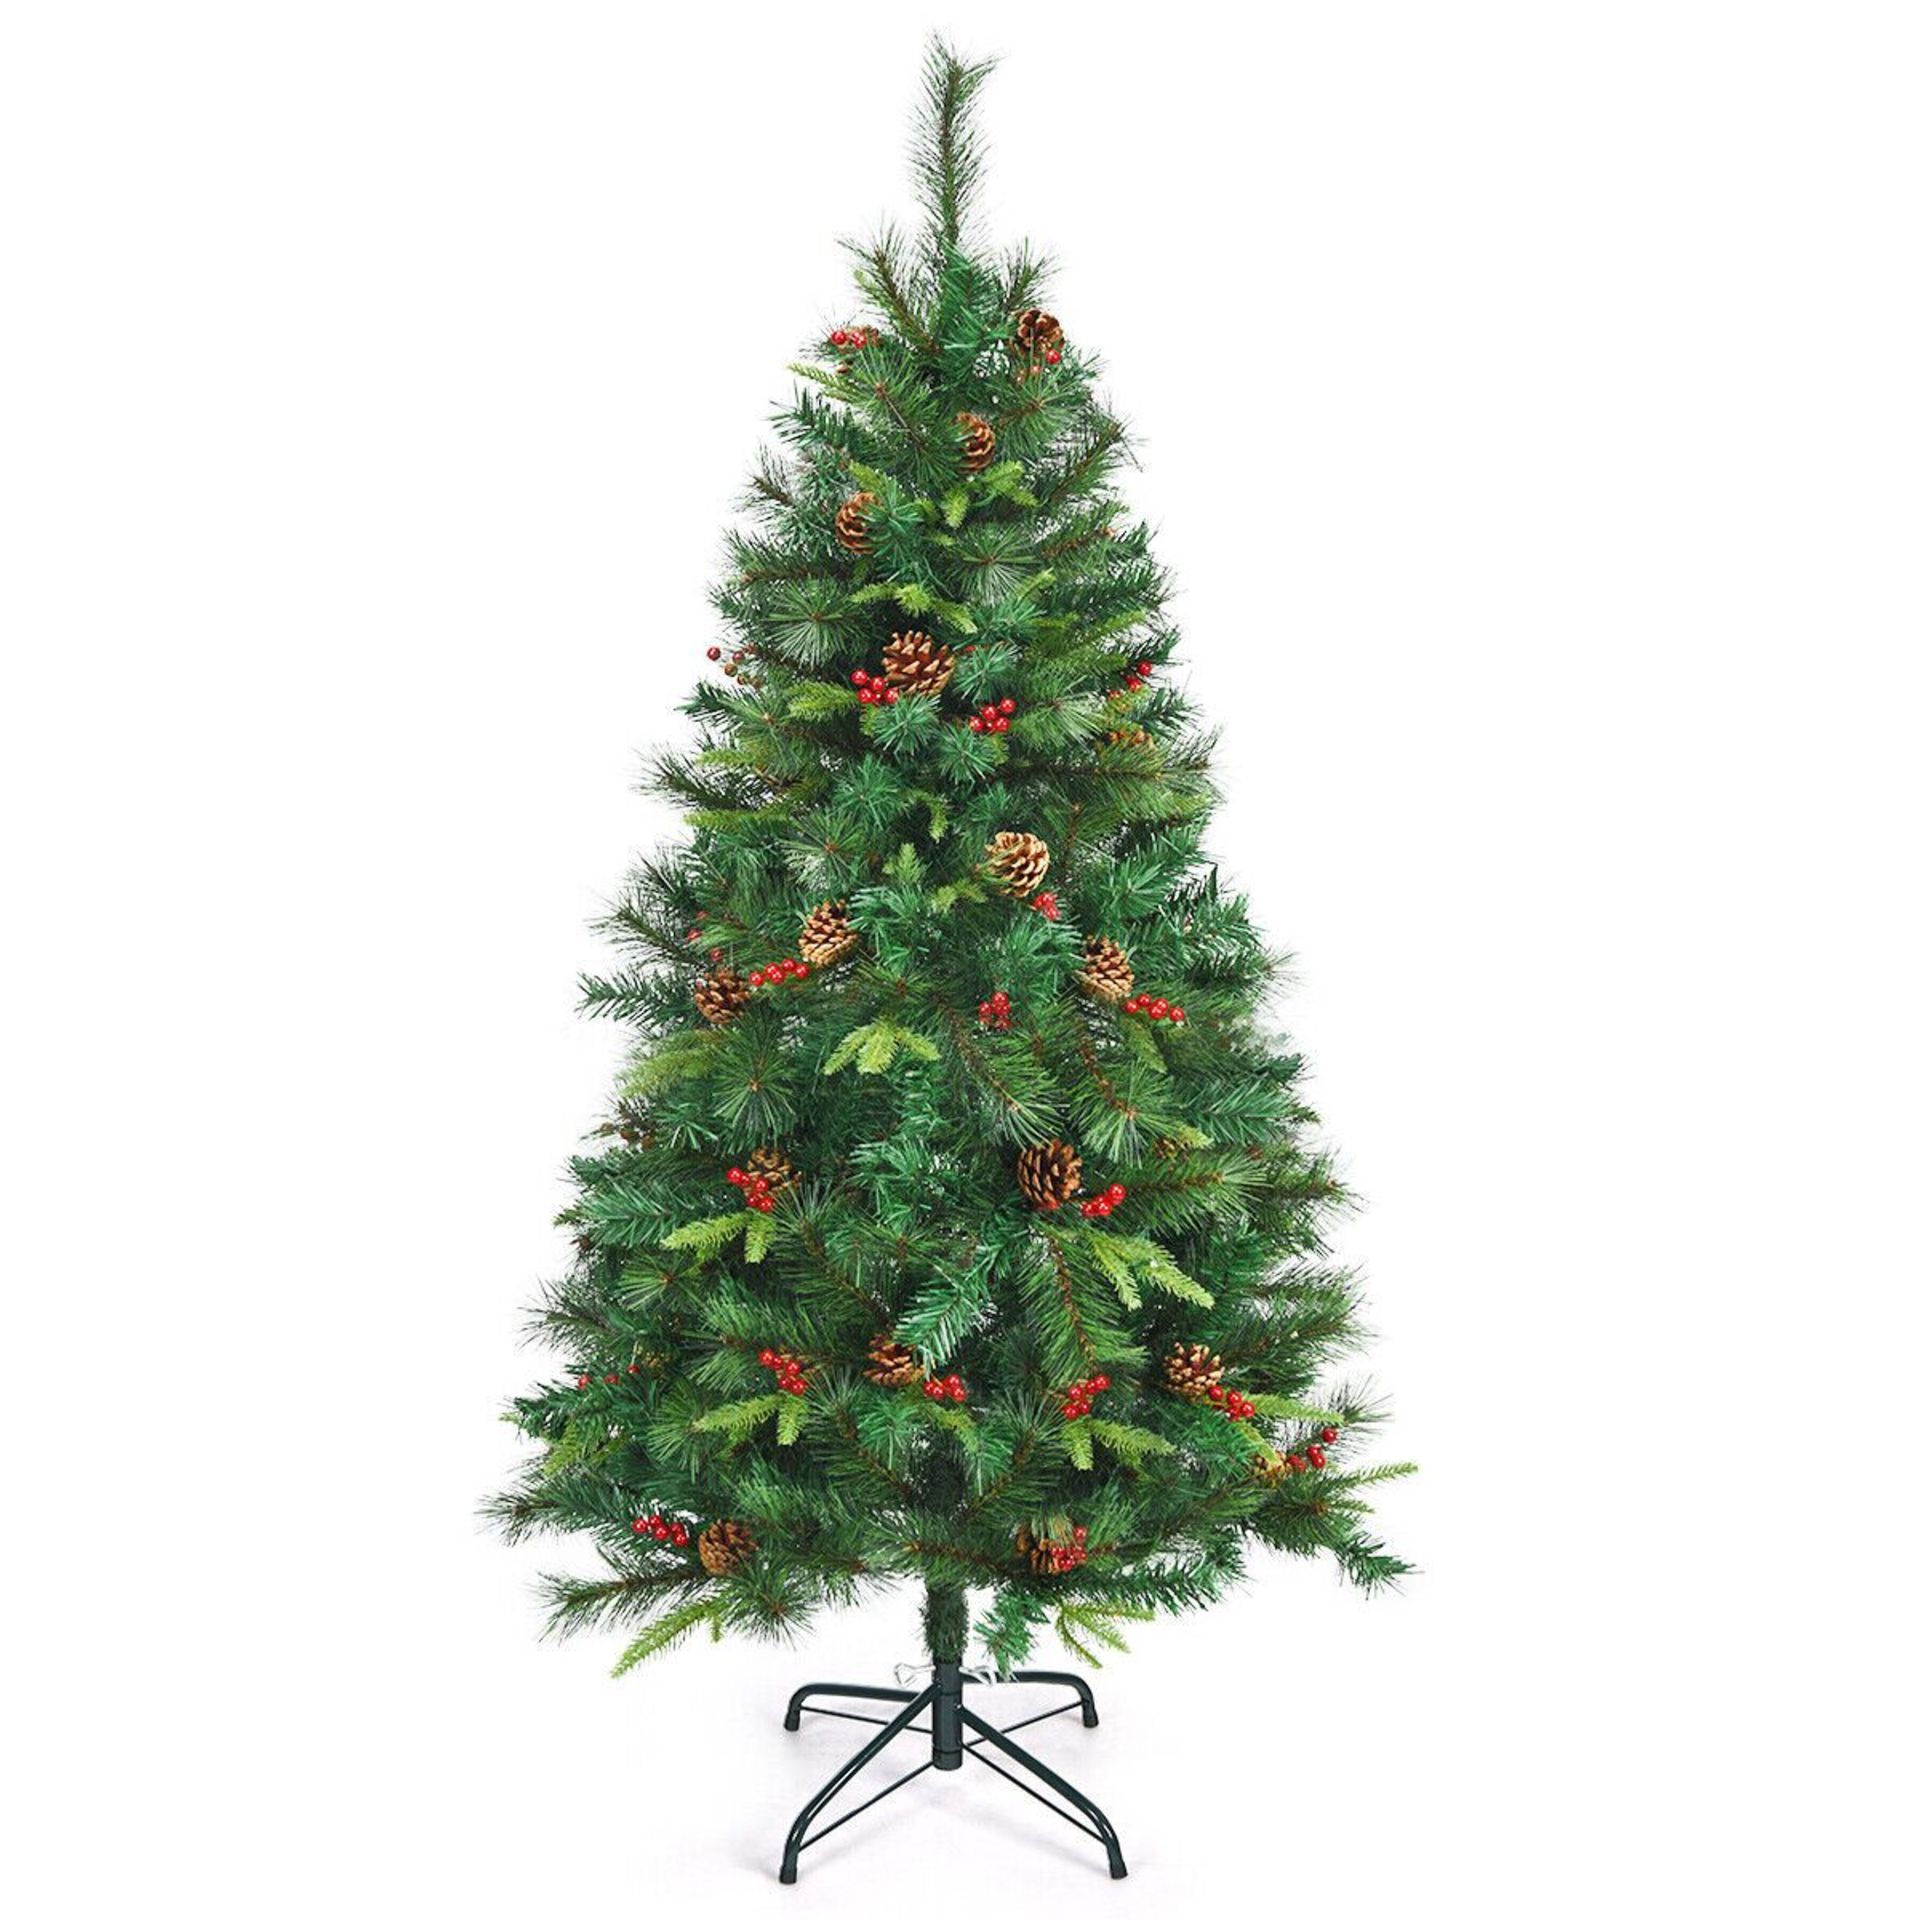 5 Feet Pre-Lit Artificial Christmas Tree with Red Berries R13-15